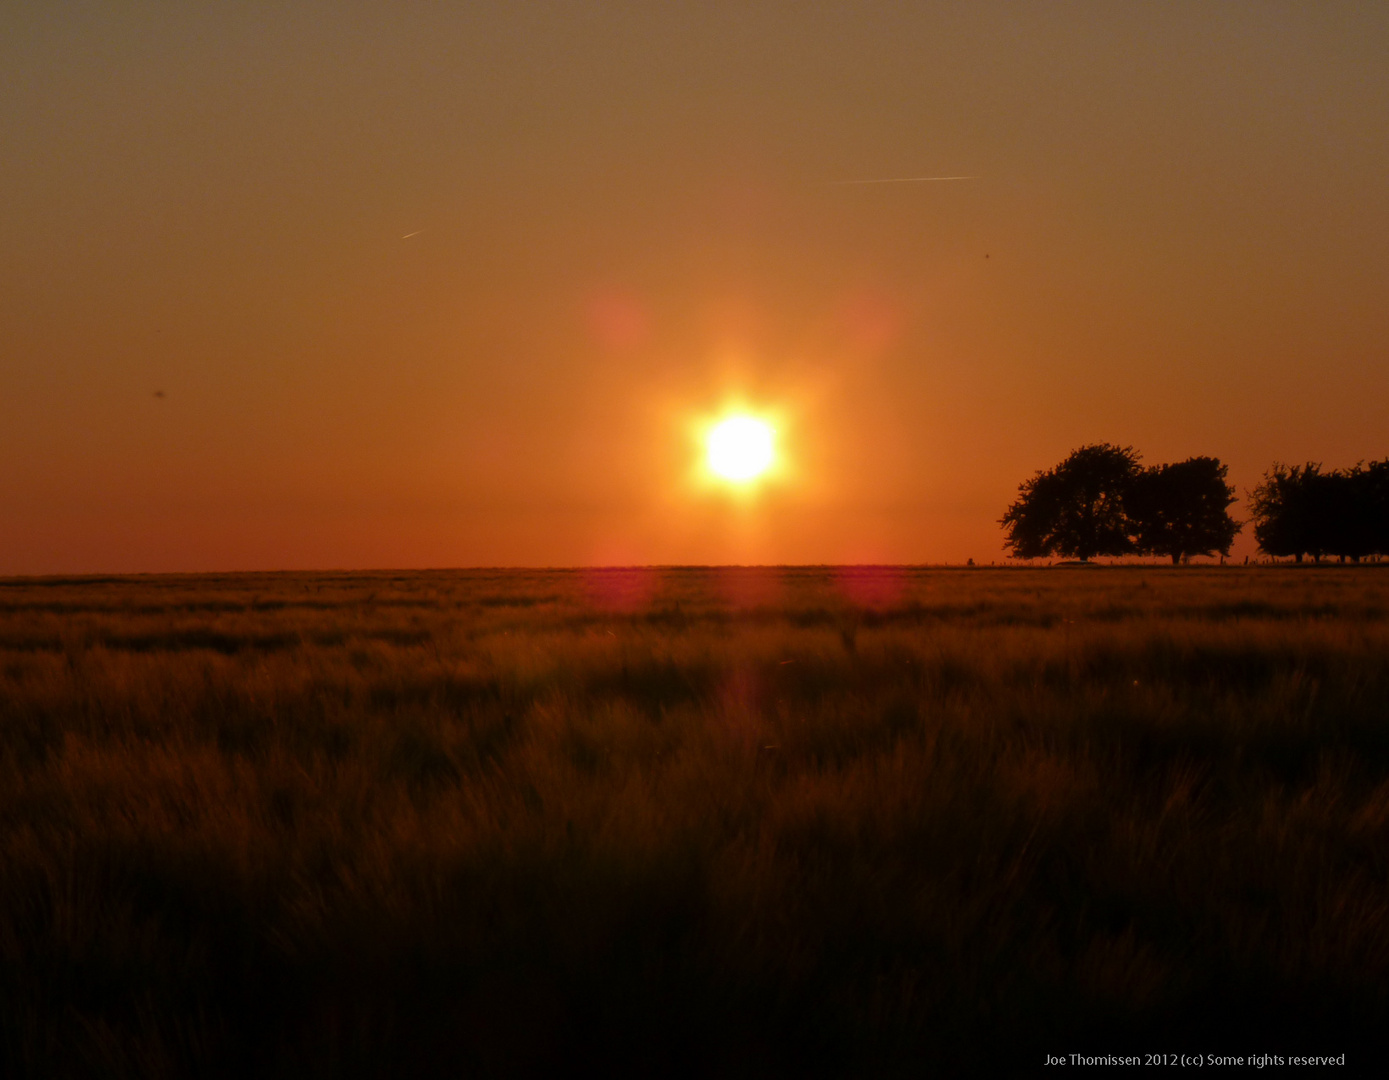 Sunset over a Wheat Field